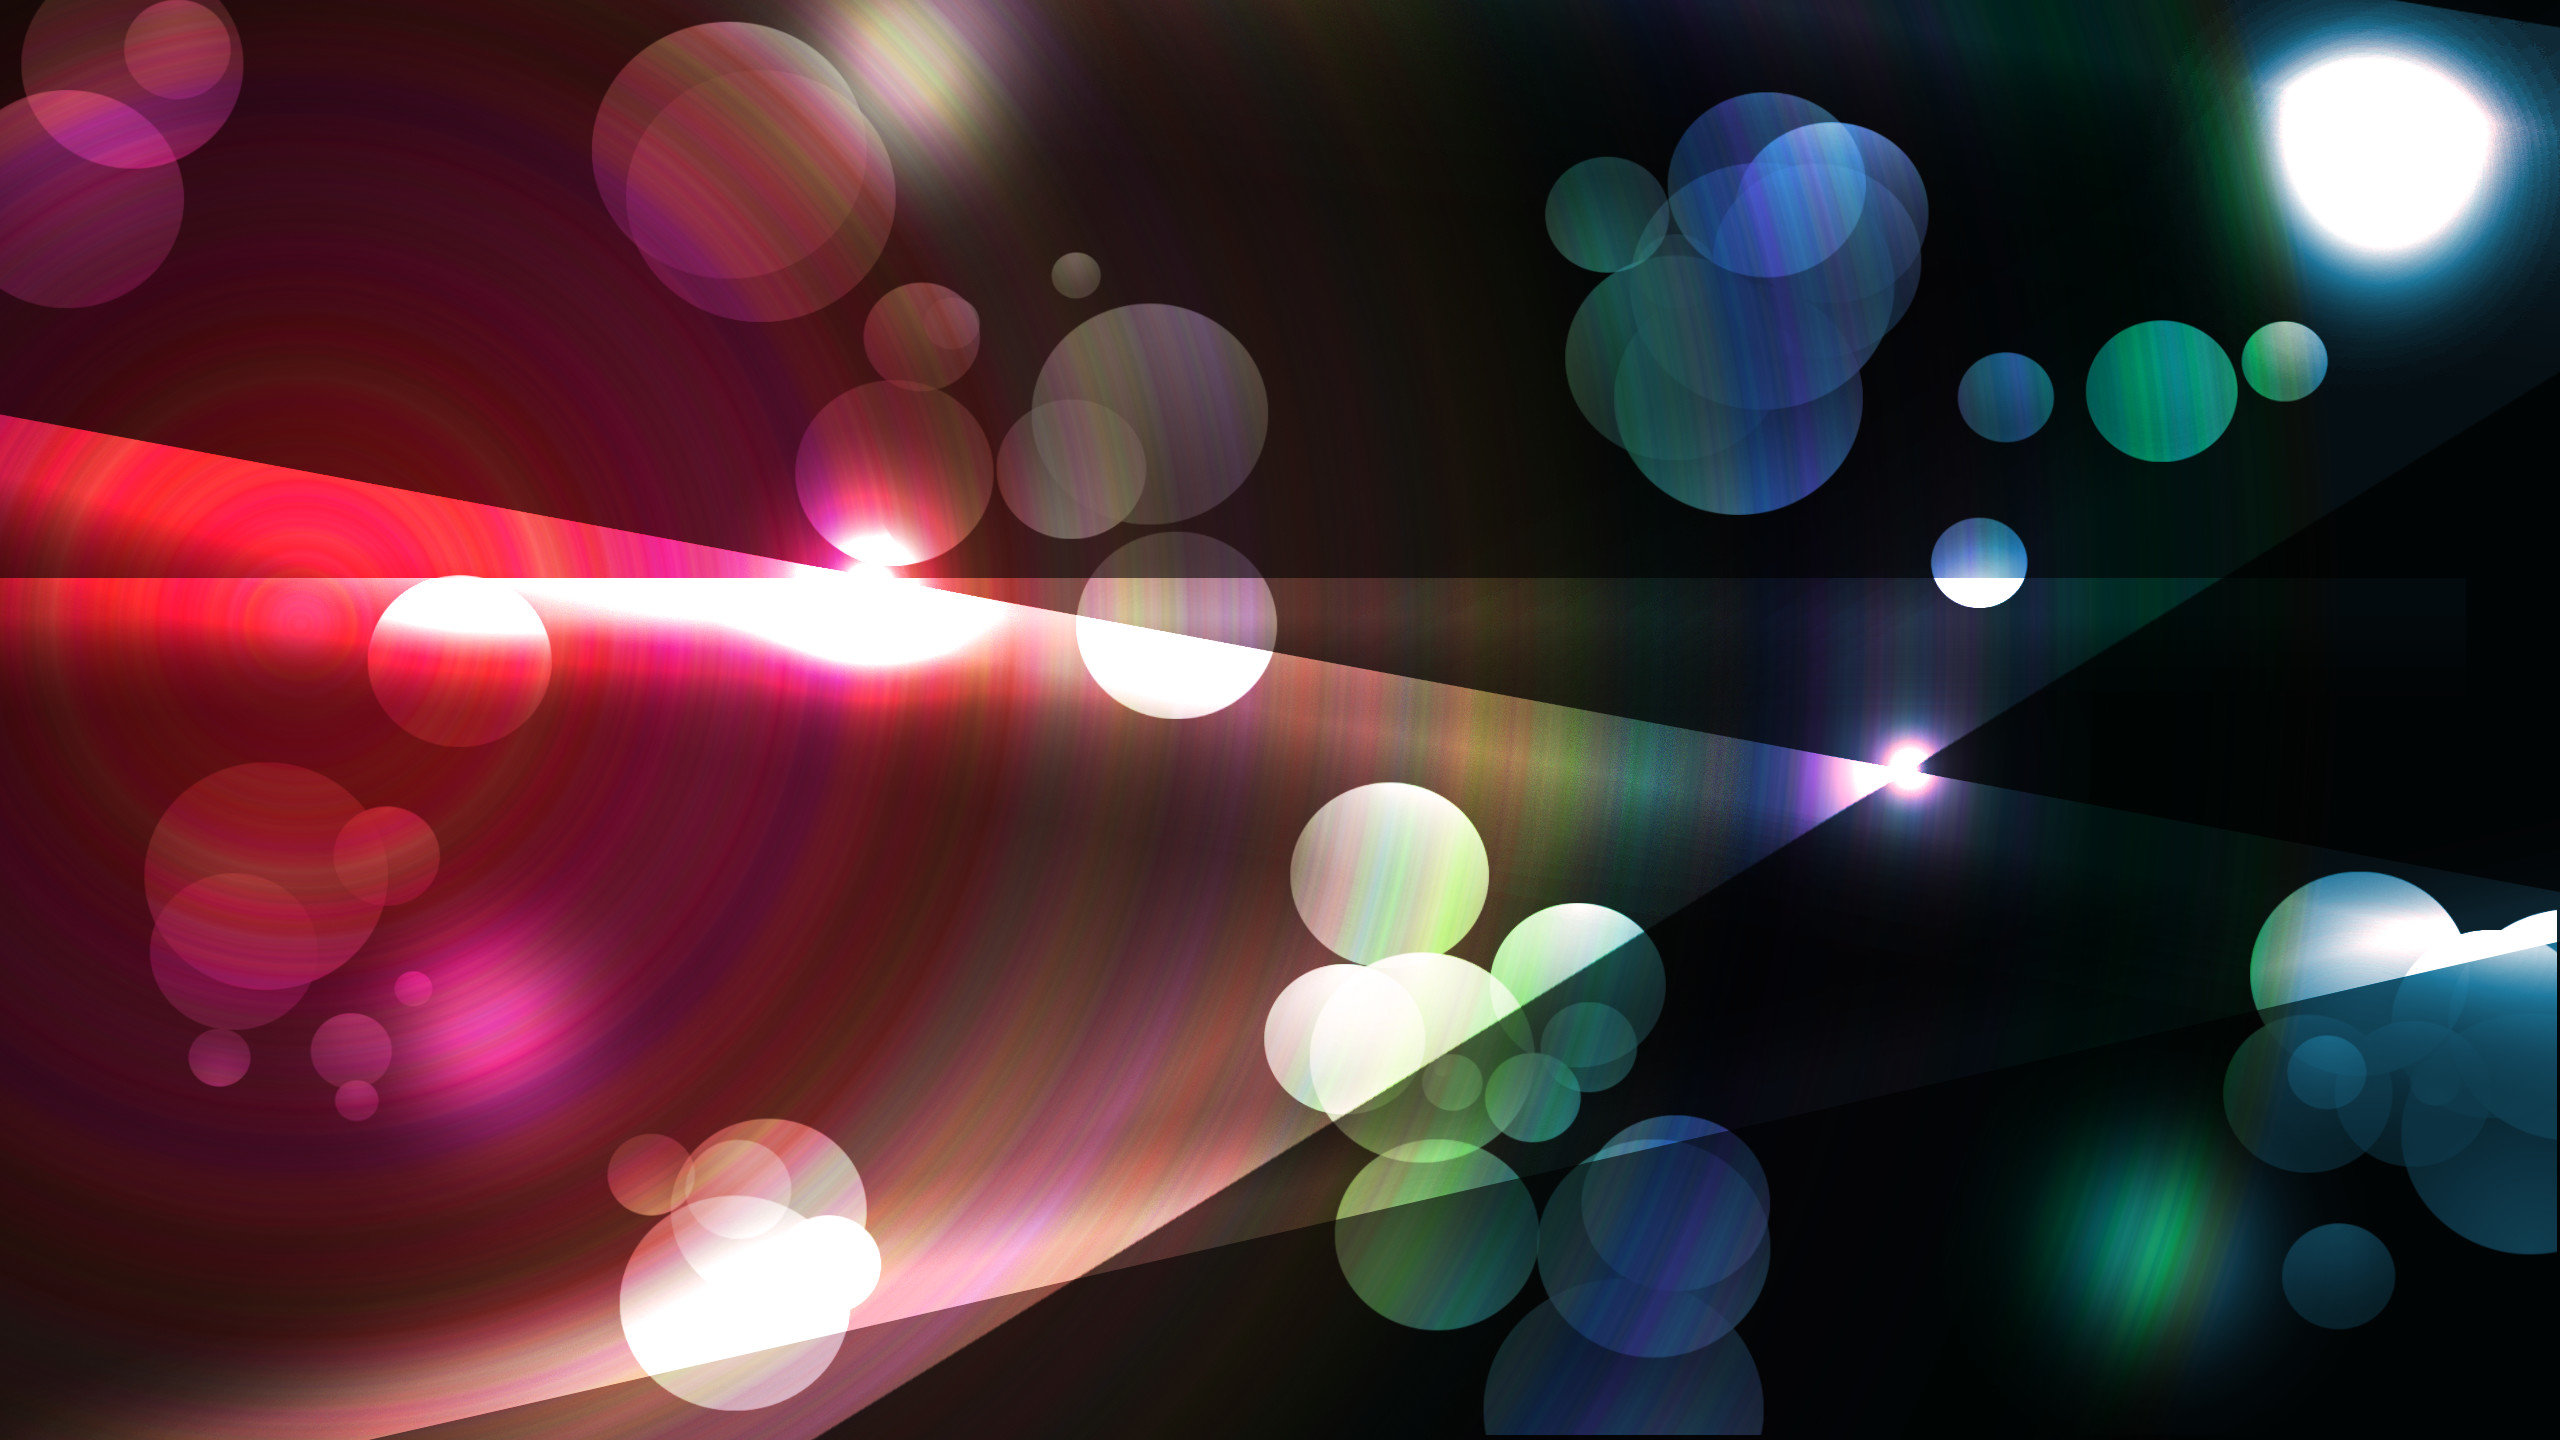 Free download Light background ID:47854 hd 2560x1440 for computer